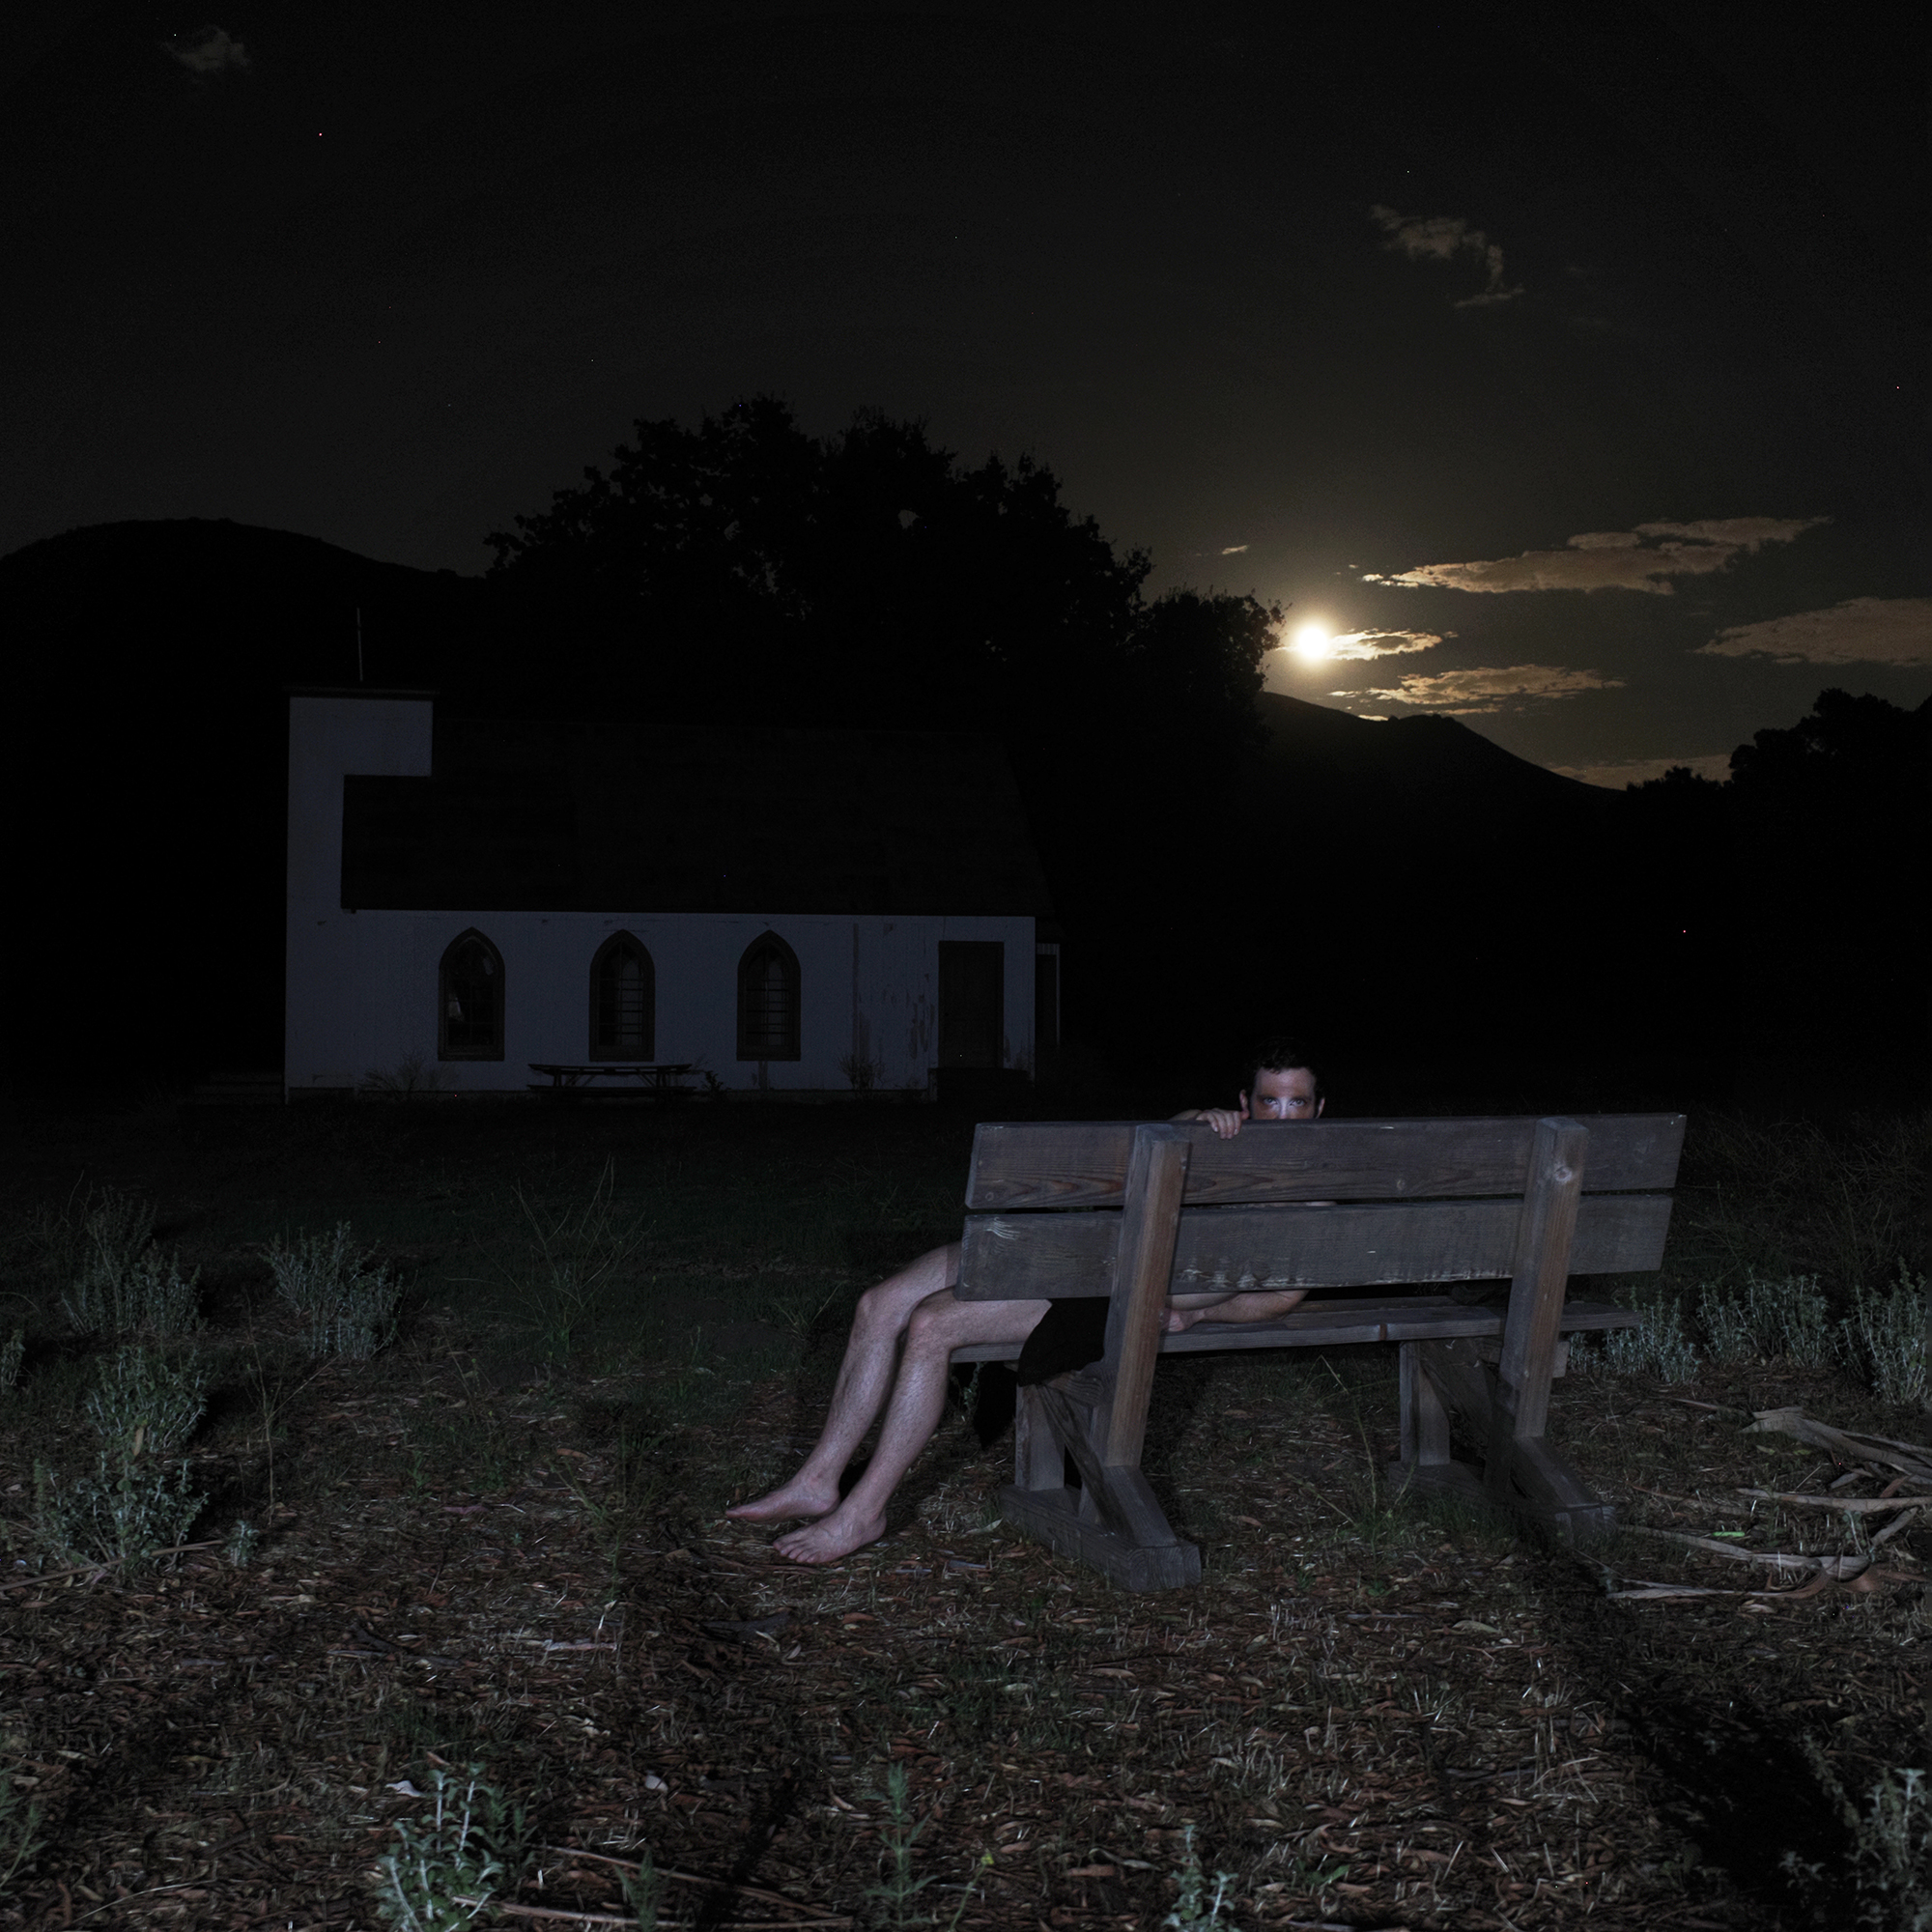 Image of a pale figure reclined on a bench in moonlight with a church behind them peering at the camera.